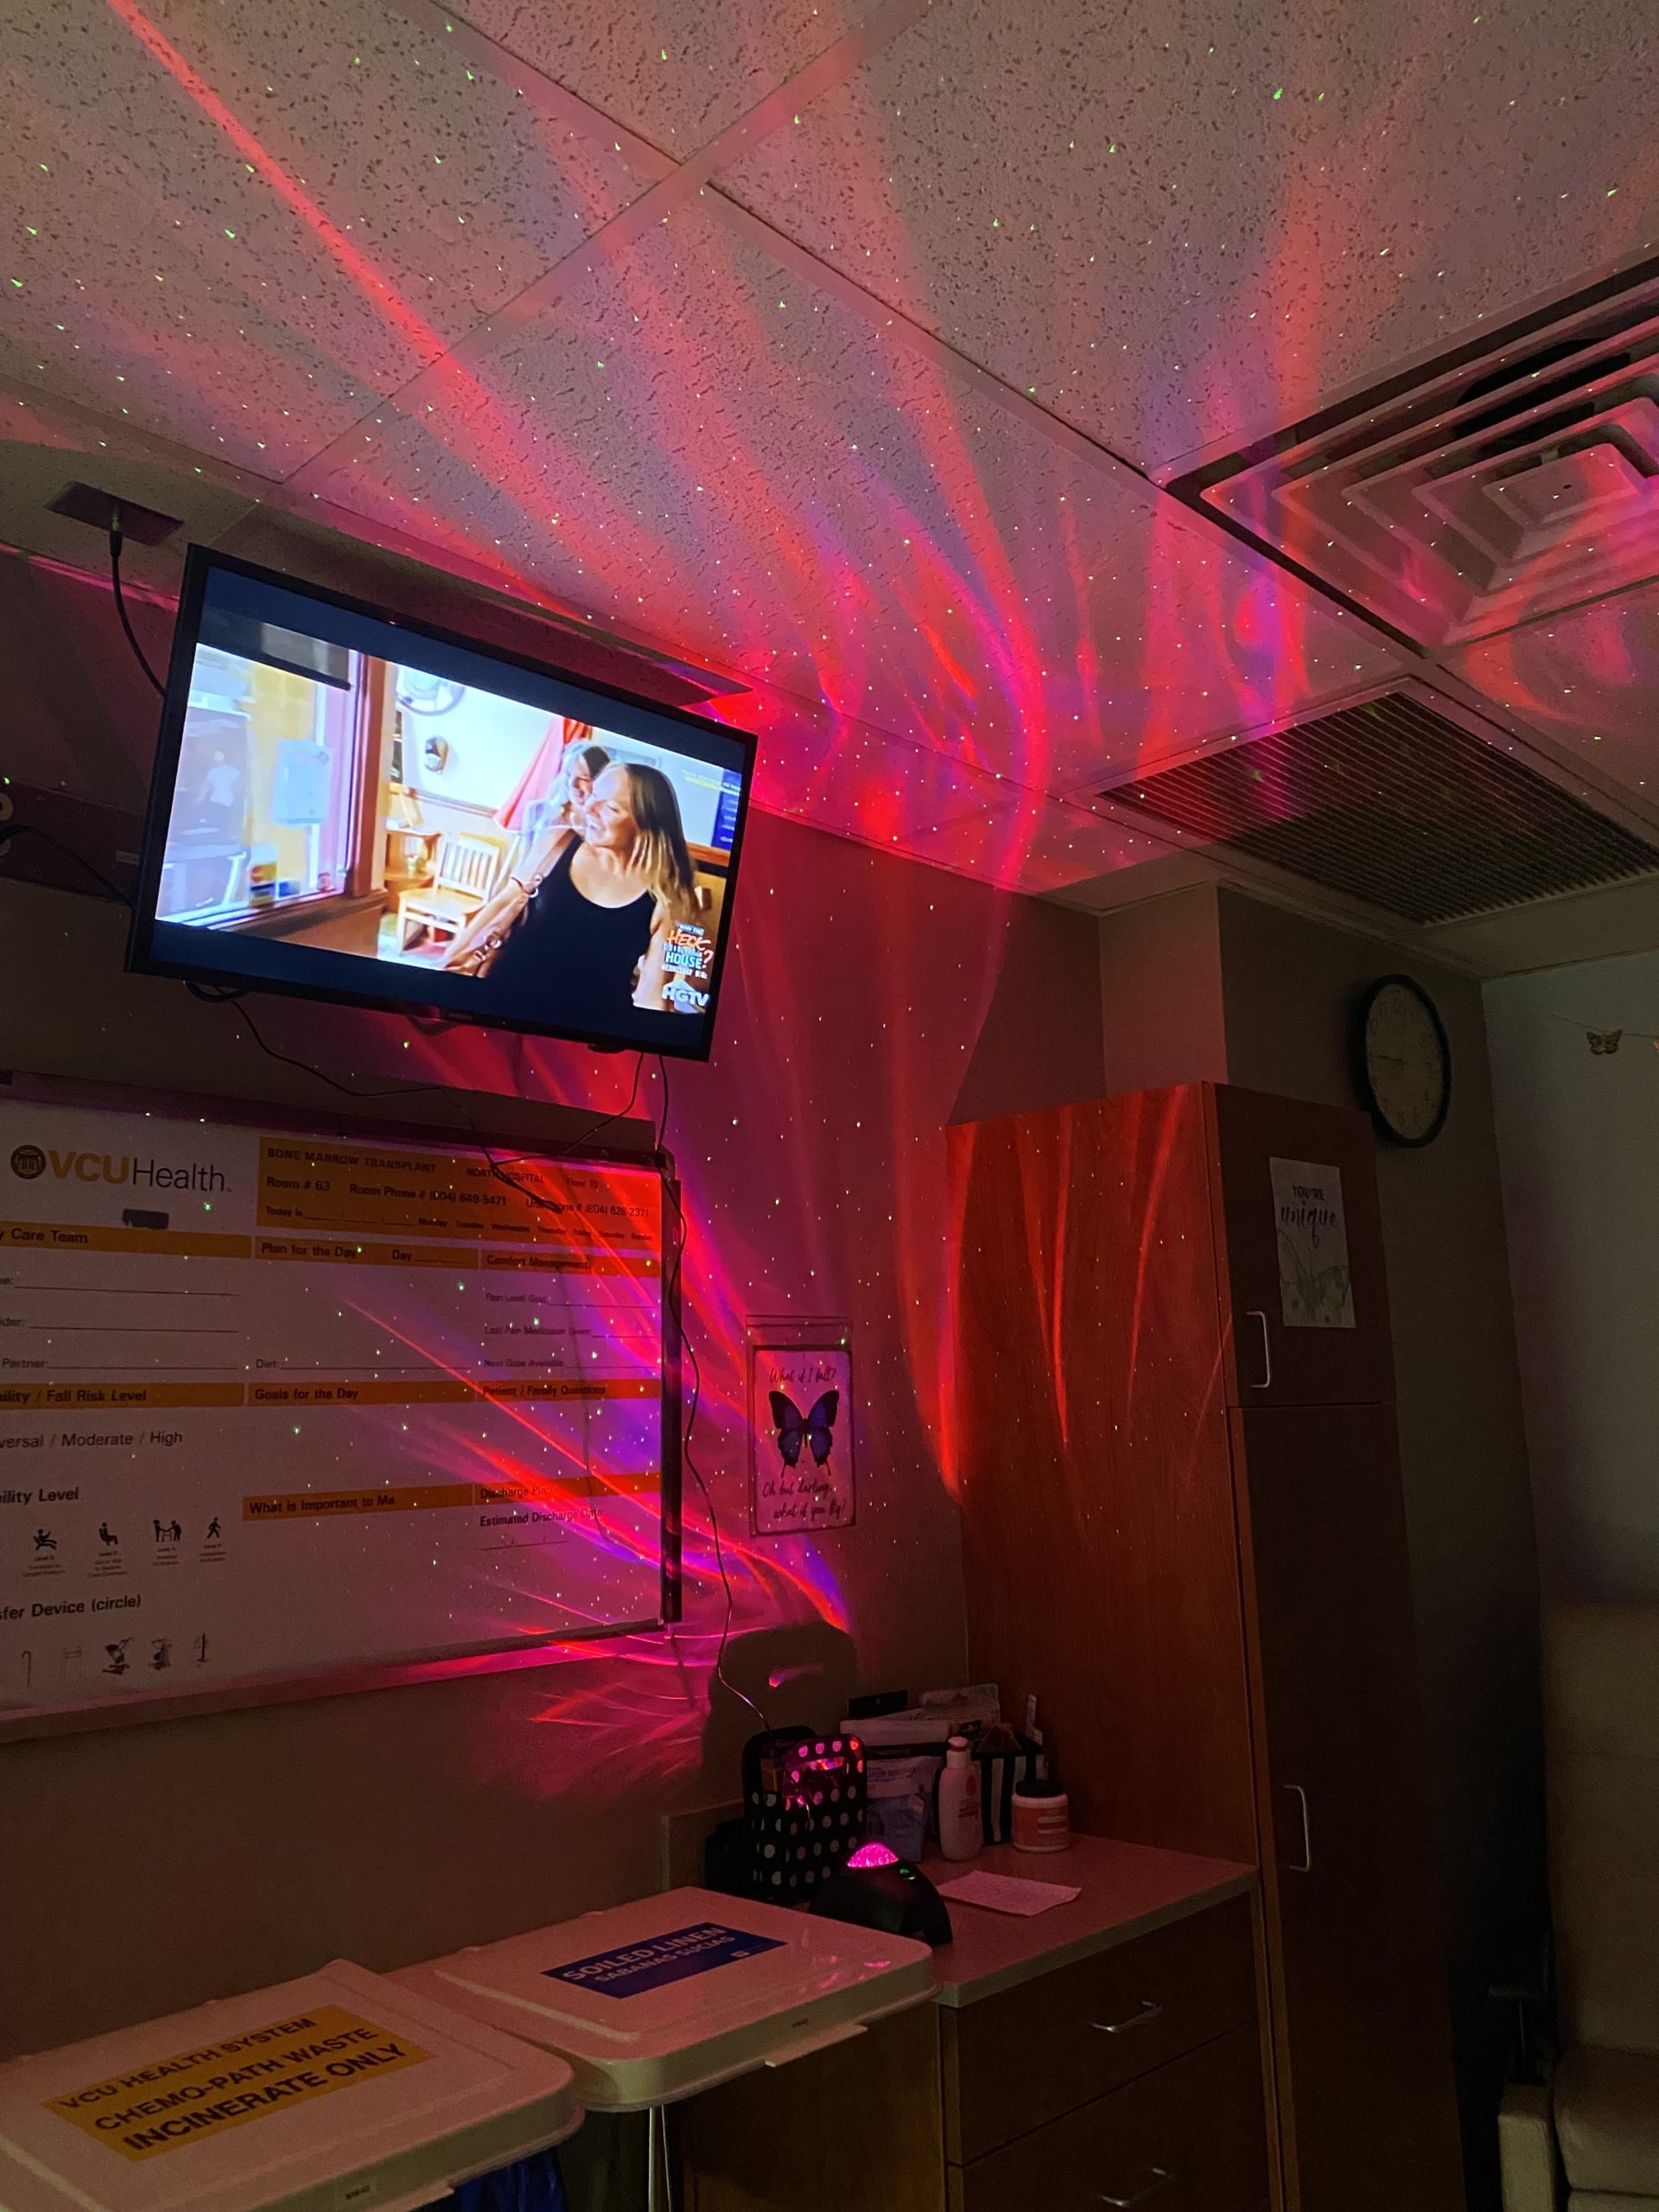 A pink light shines on the wall of a hospital